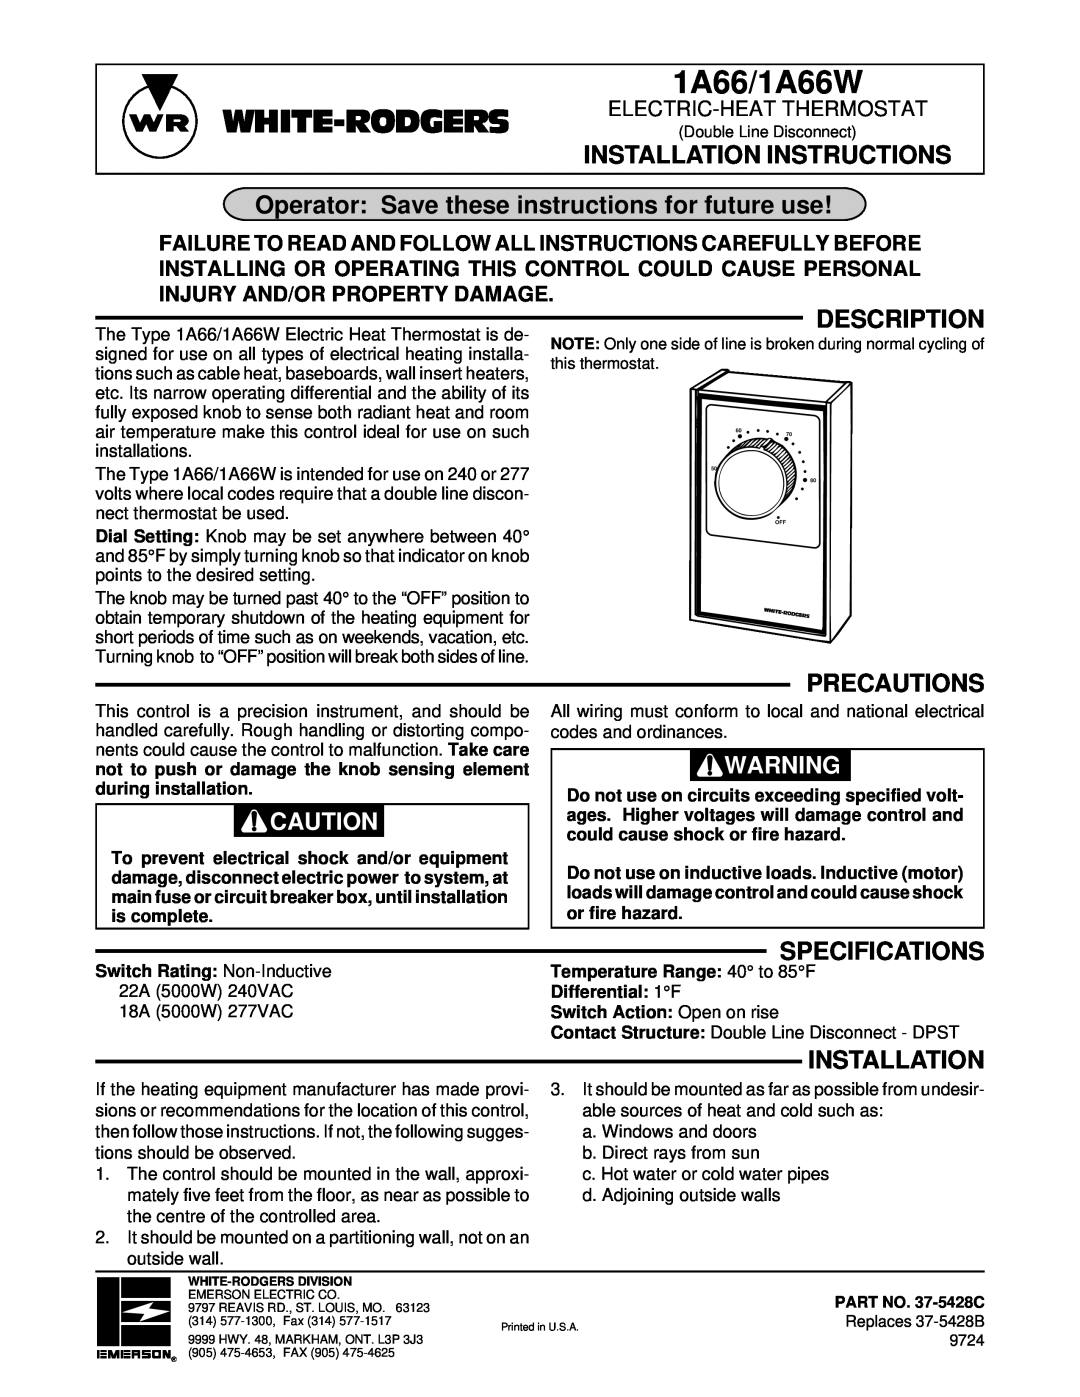 White Rodgers 1A66 installation instructions Installation Instructions, Operator Save these instructions for future use 